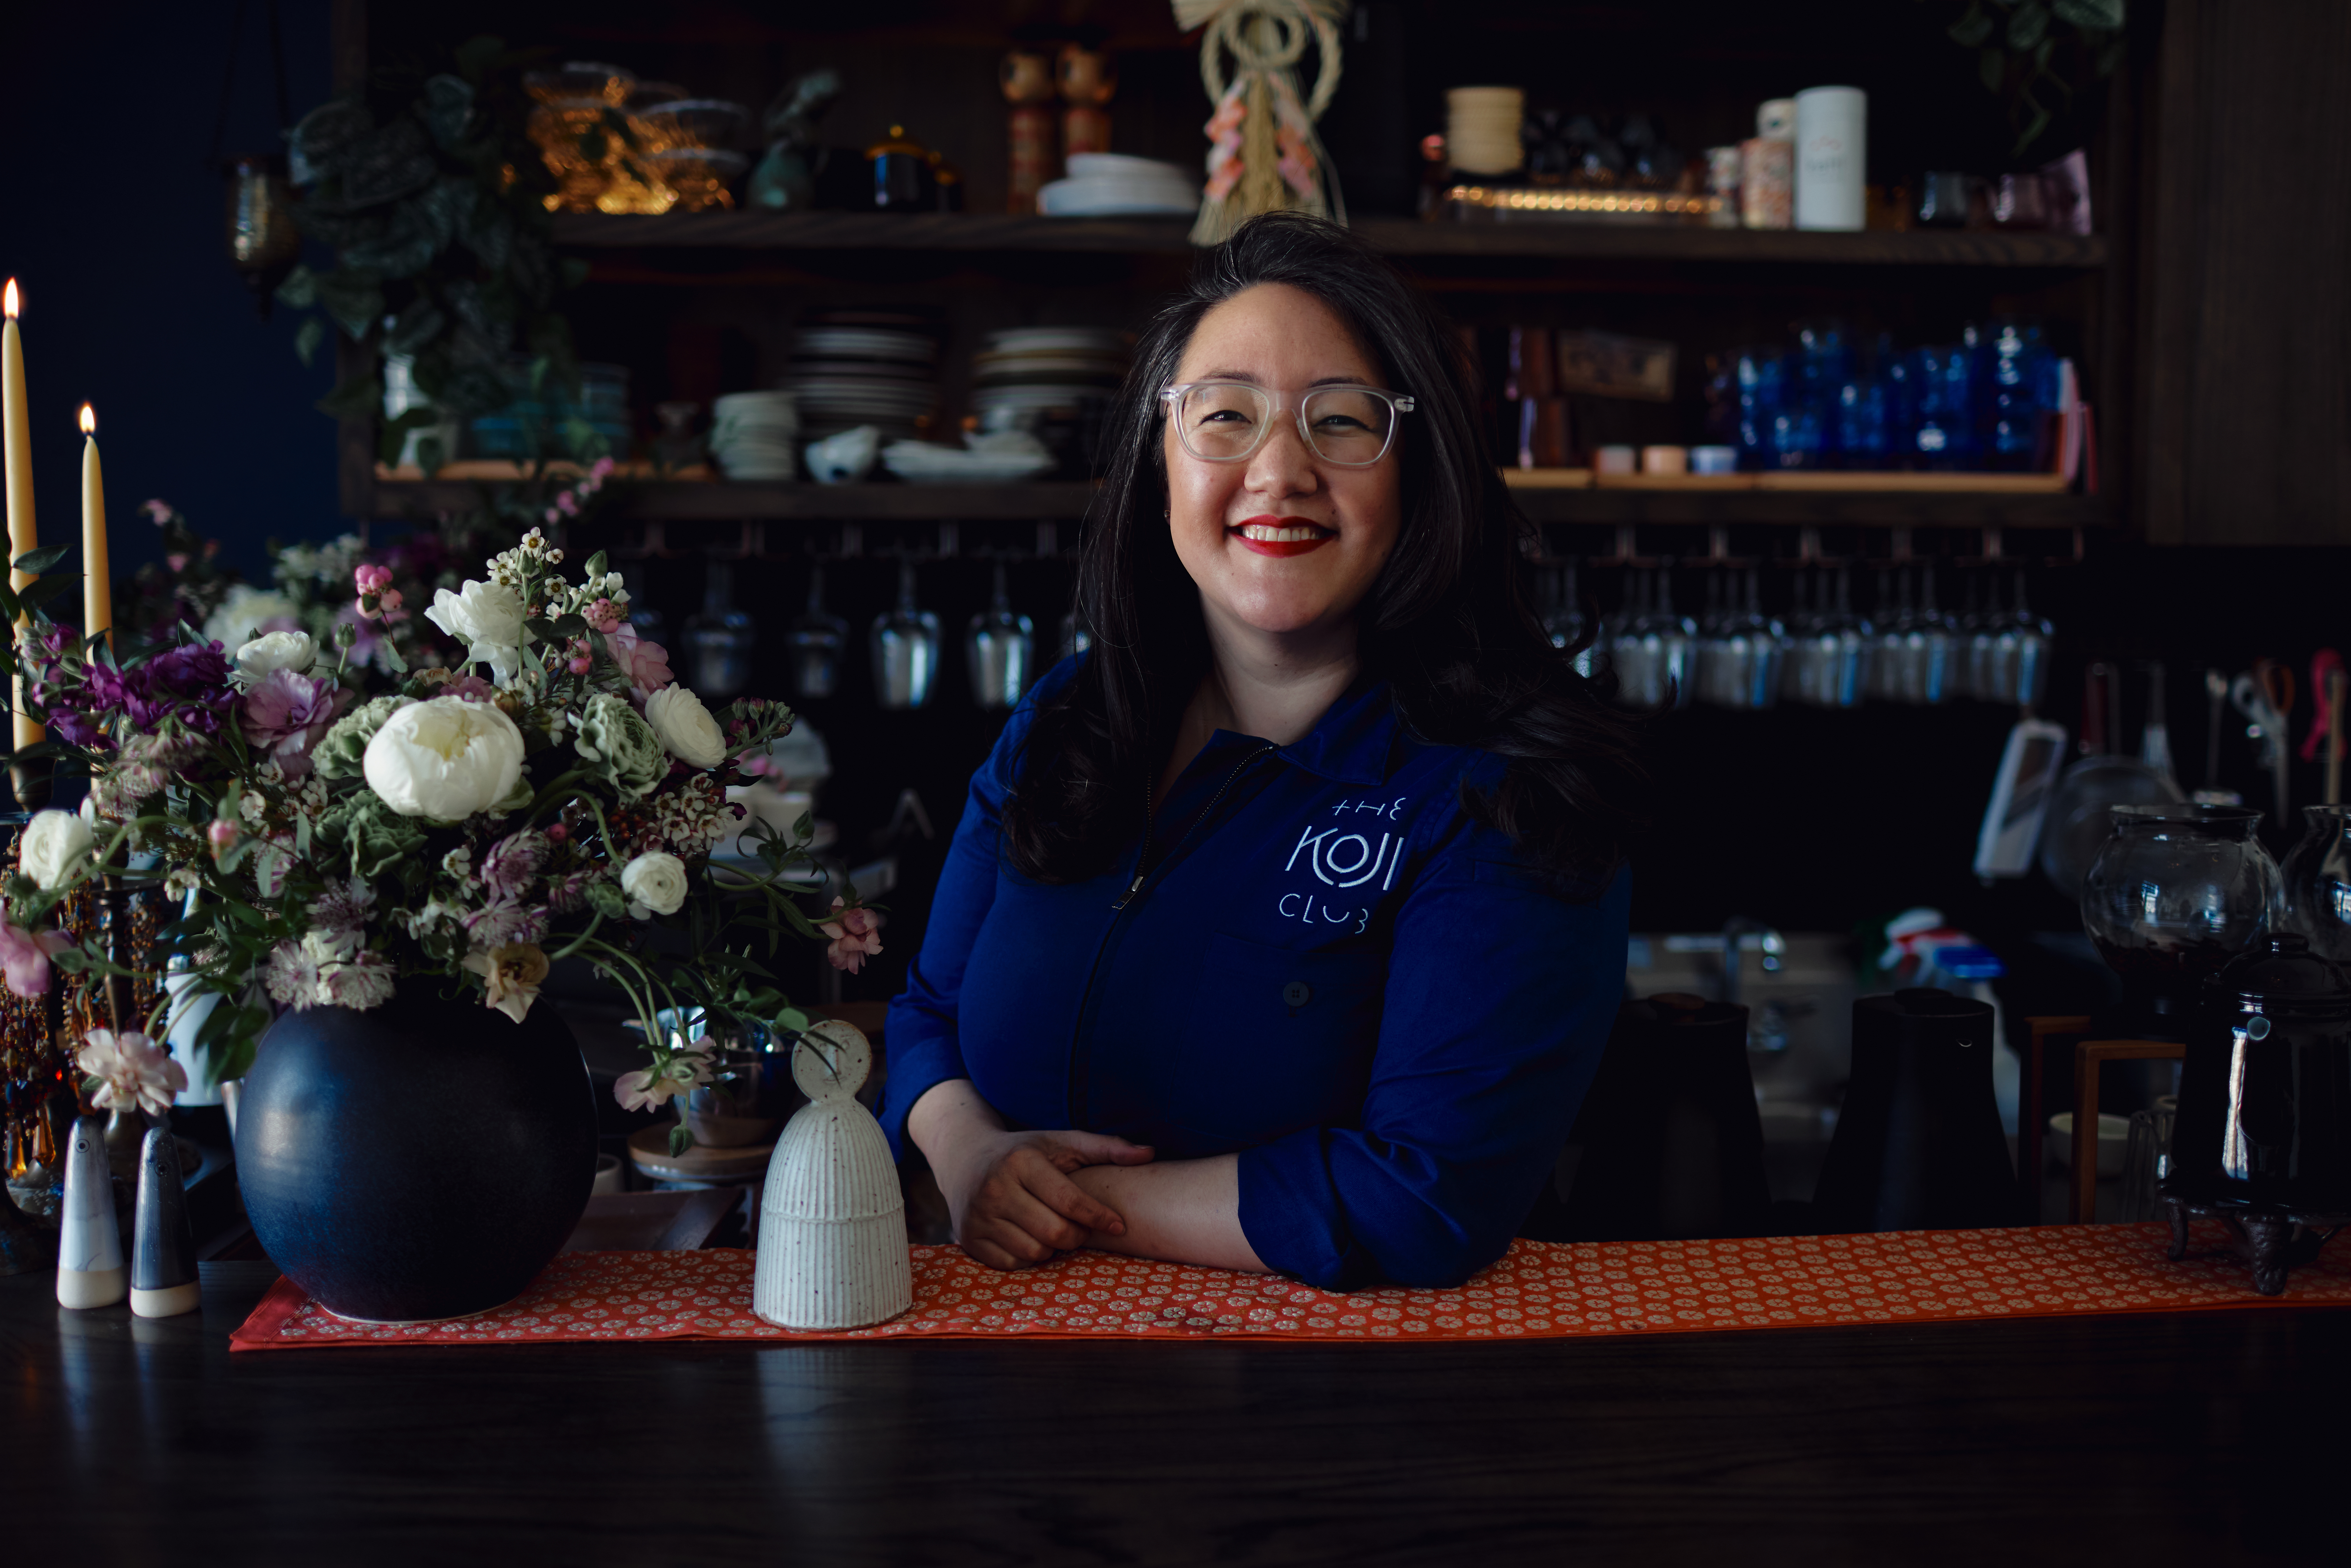 A woman stands smiling behind the sake bar for a portrait.